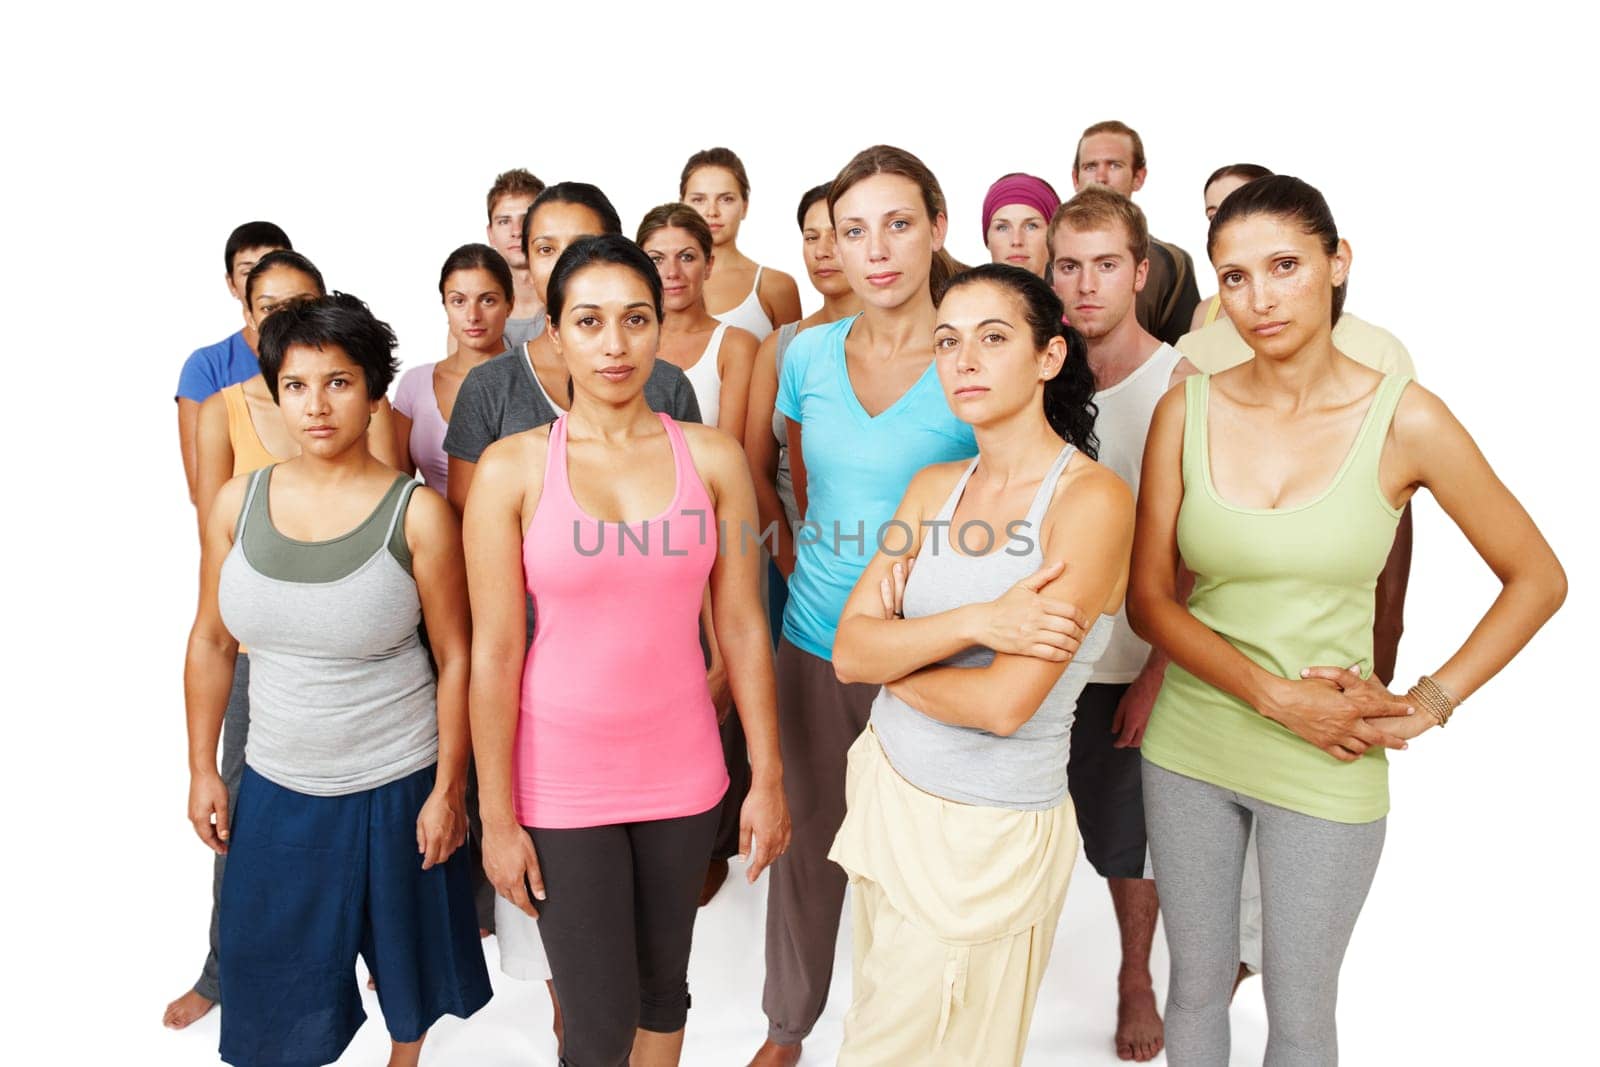 Theyre serious about yoga fitness. A serious and focused yoga class standing together on a white background. by YuriArcurs